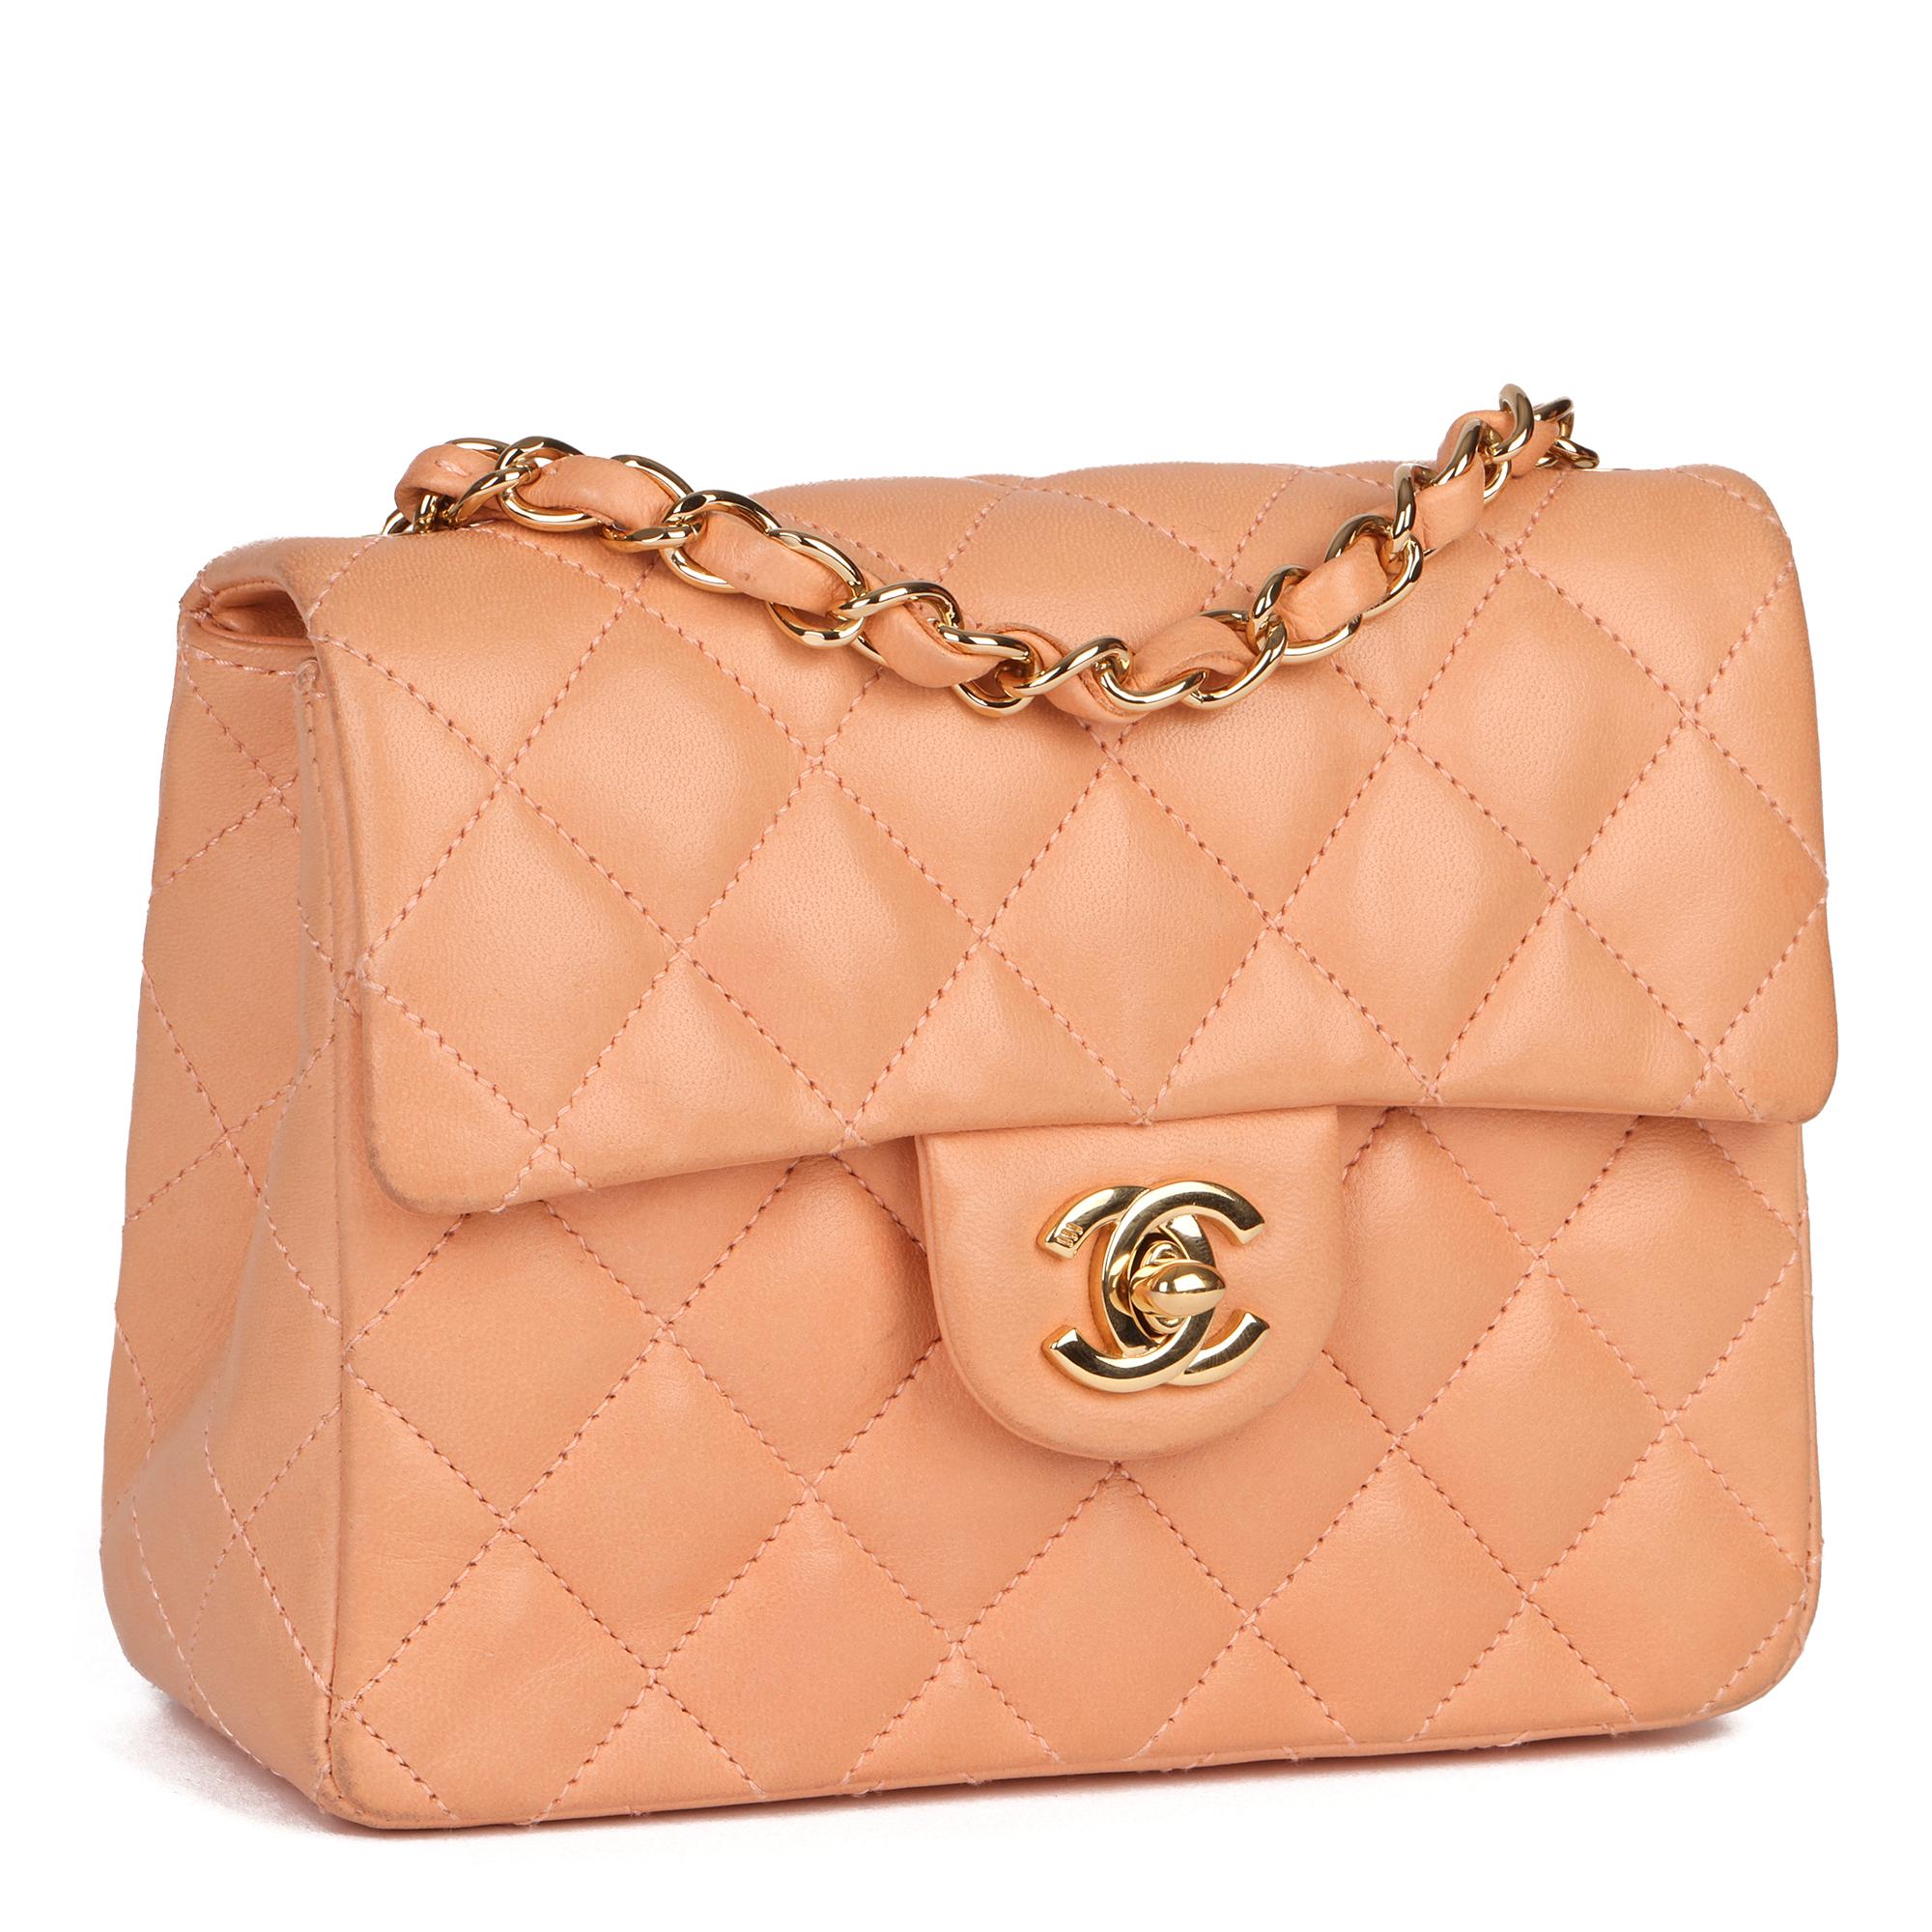 CHANEL
Peach Quilted Lambskin Leather Vintage Mini Flap Bag 

Xupes Reference: CB294
Serial Number: 9615720
Age (Circa): 2005
Accompanied By: Chanel Dust Bag, Box, Authenticity Card, Care Booklet, Receipt
Authenticity Details: Date Stamp (Made in